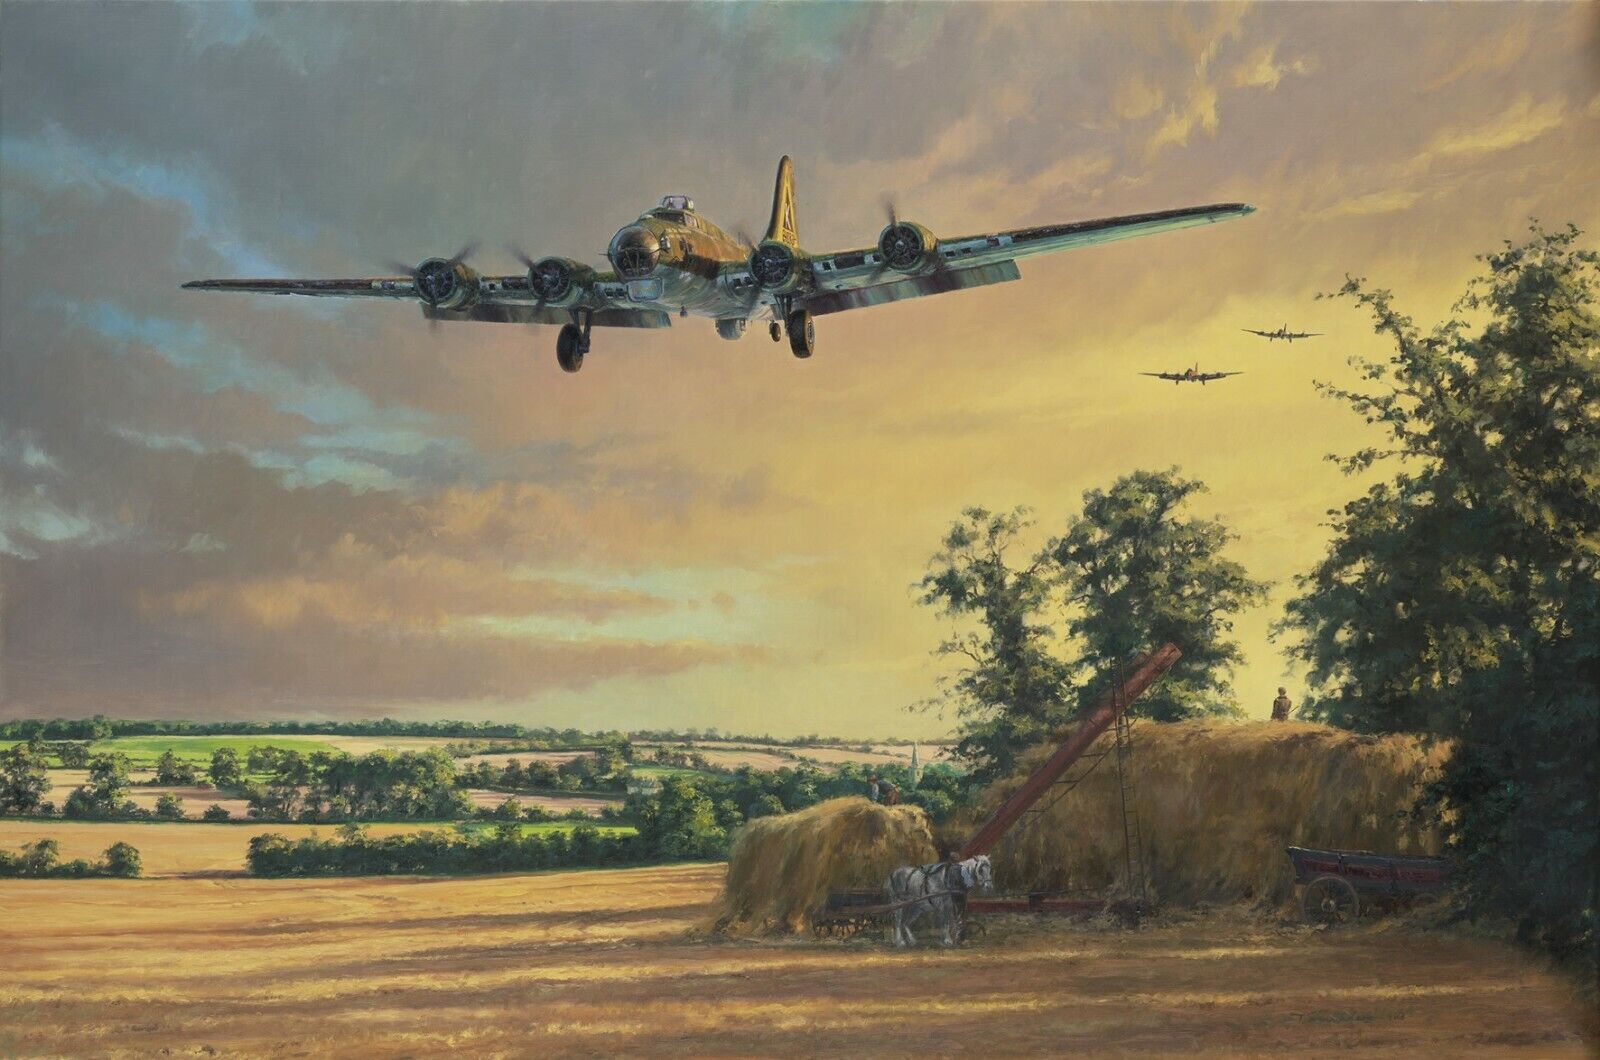 A Welcome Return by Anthony Saunders signed by two B-17 Pilots